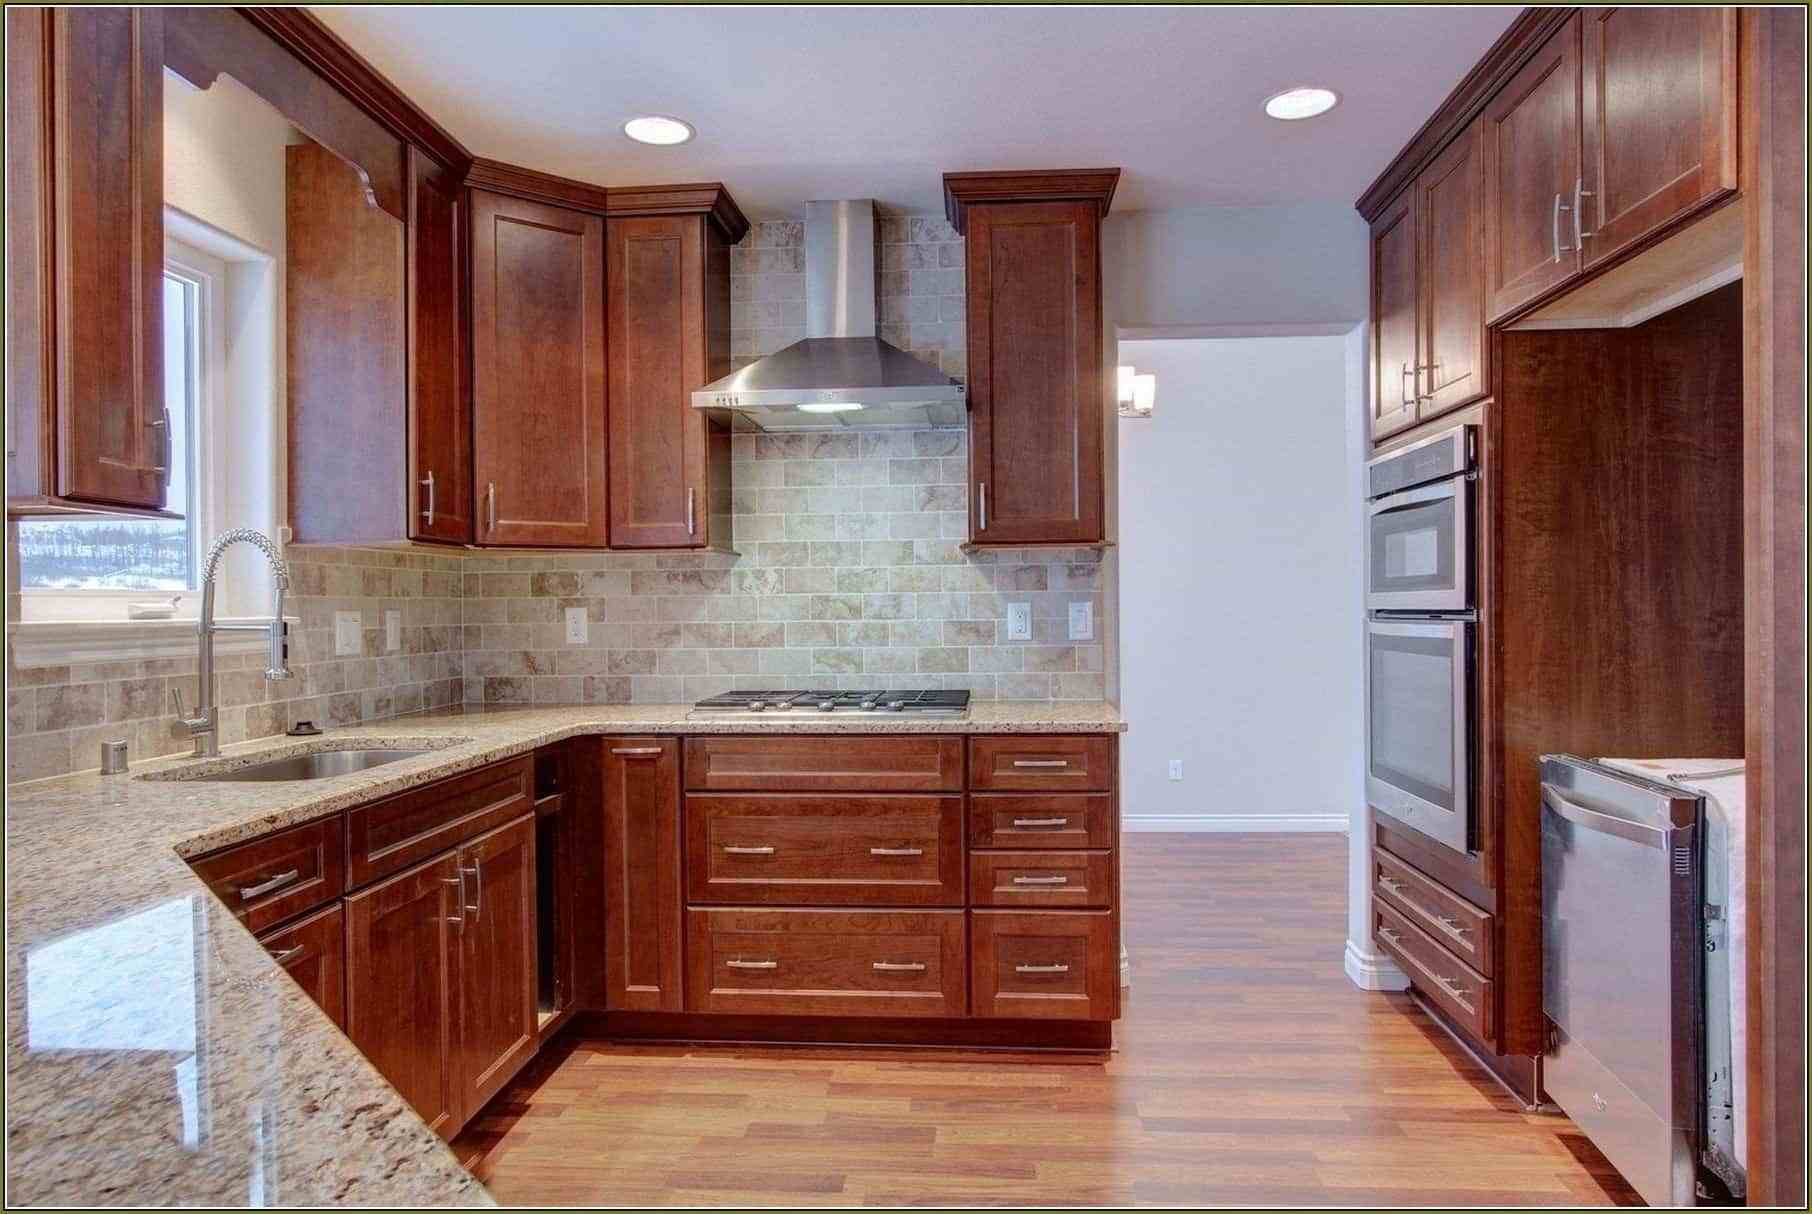 10 Unique Crown Molding Ideas For Kitchen crown molding for kitchen cabinets transforming home how to add 2024